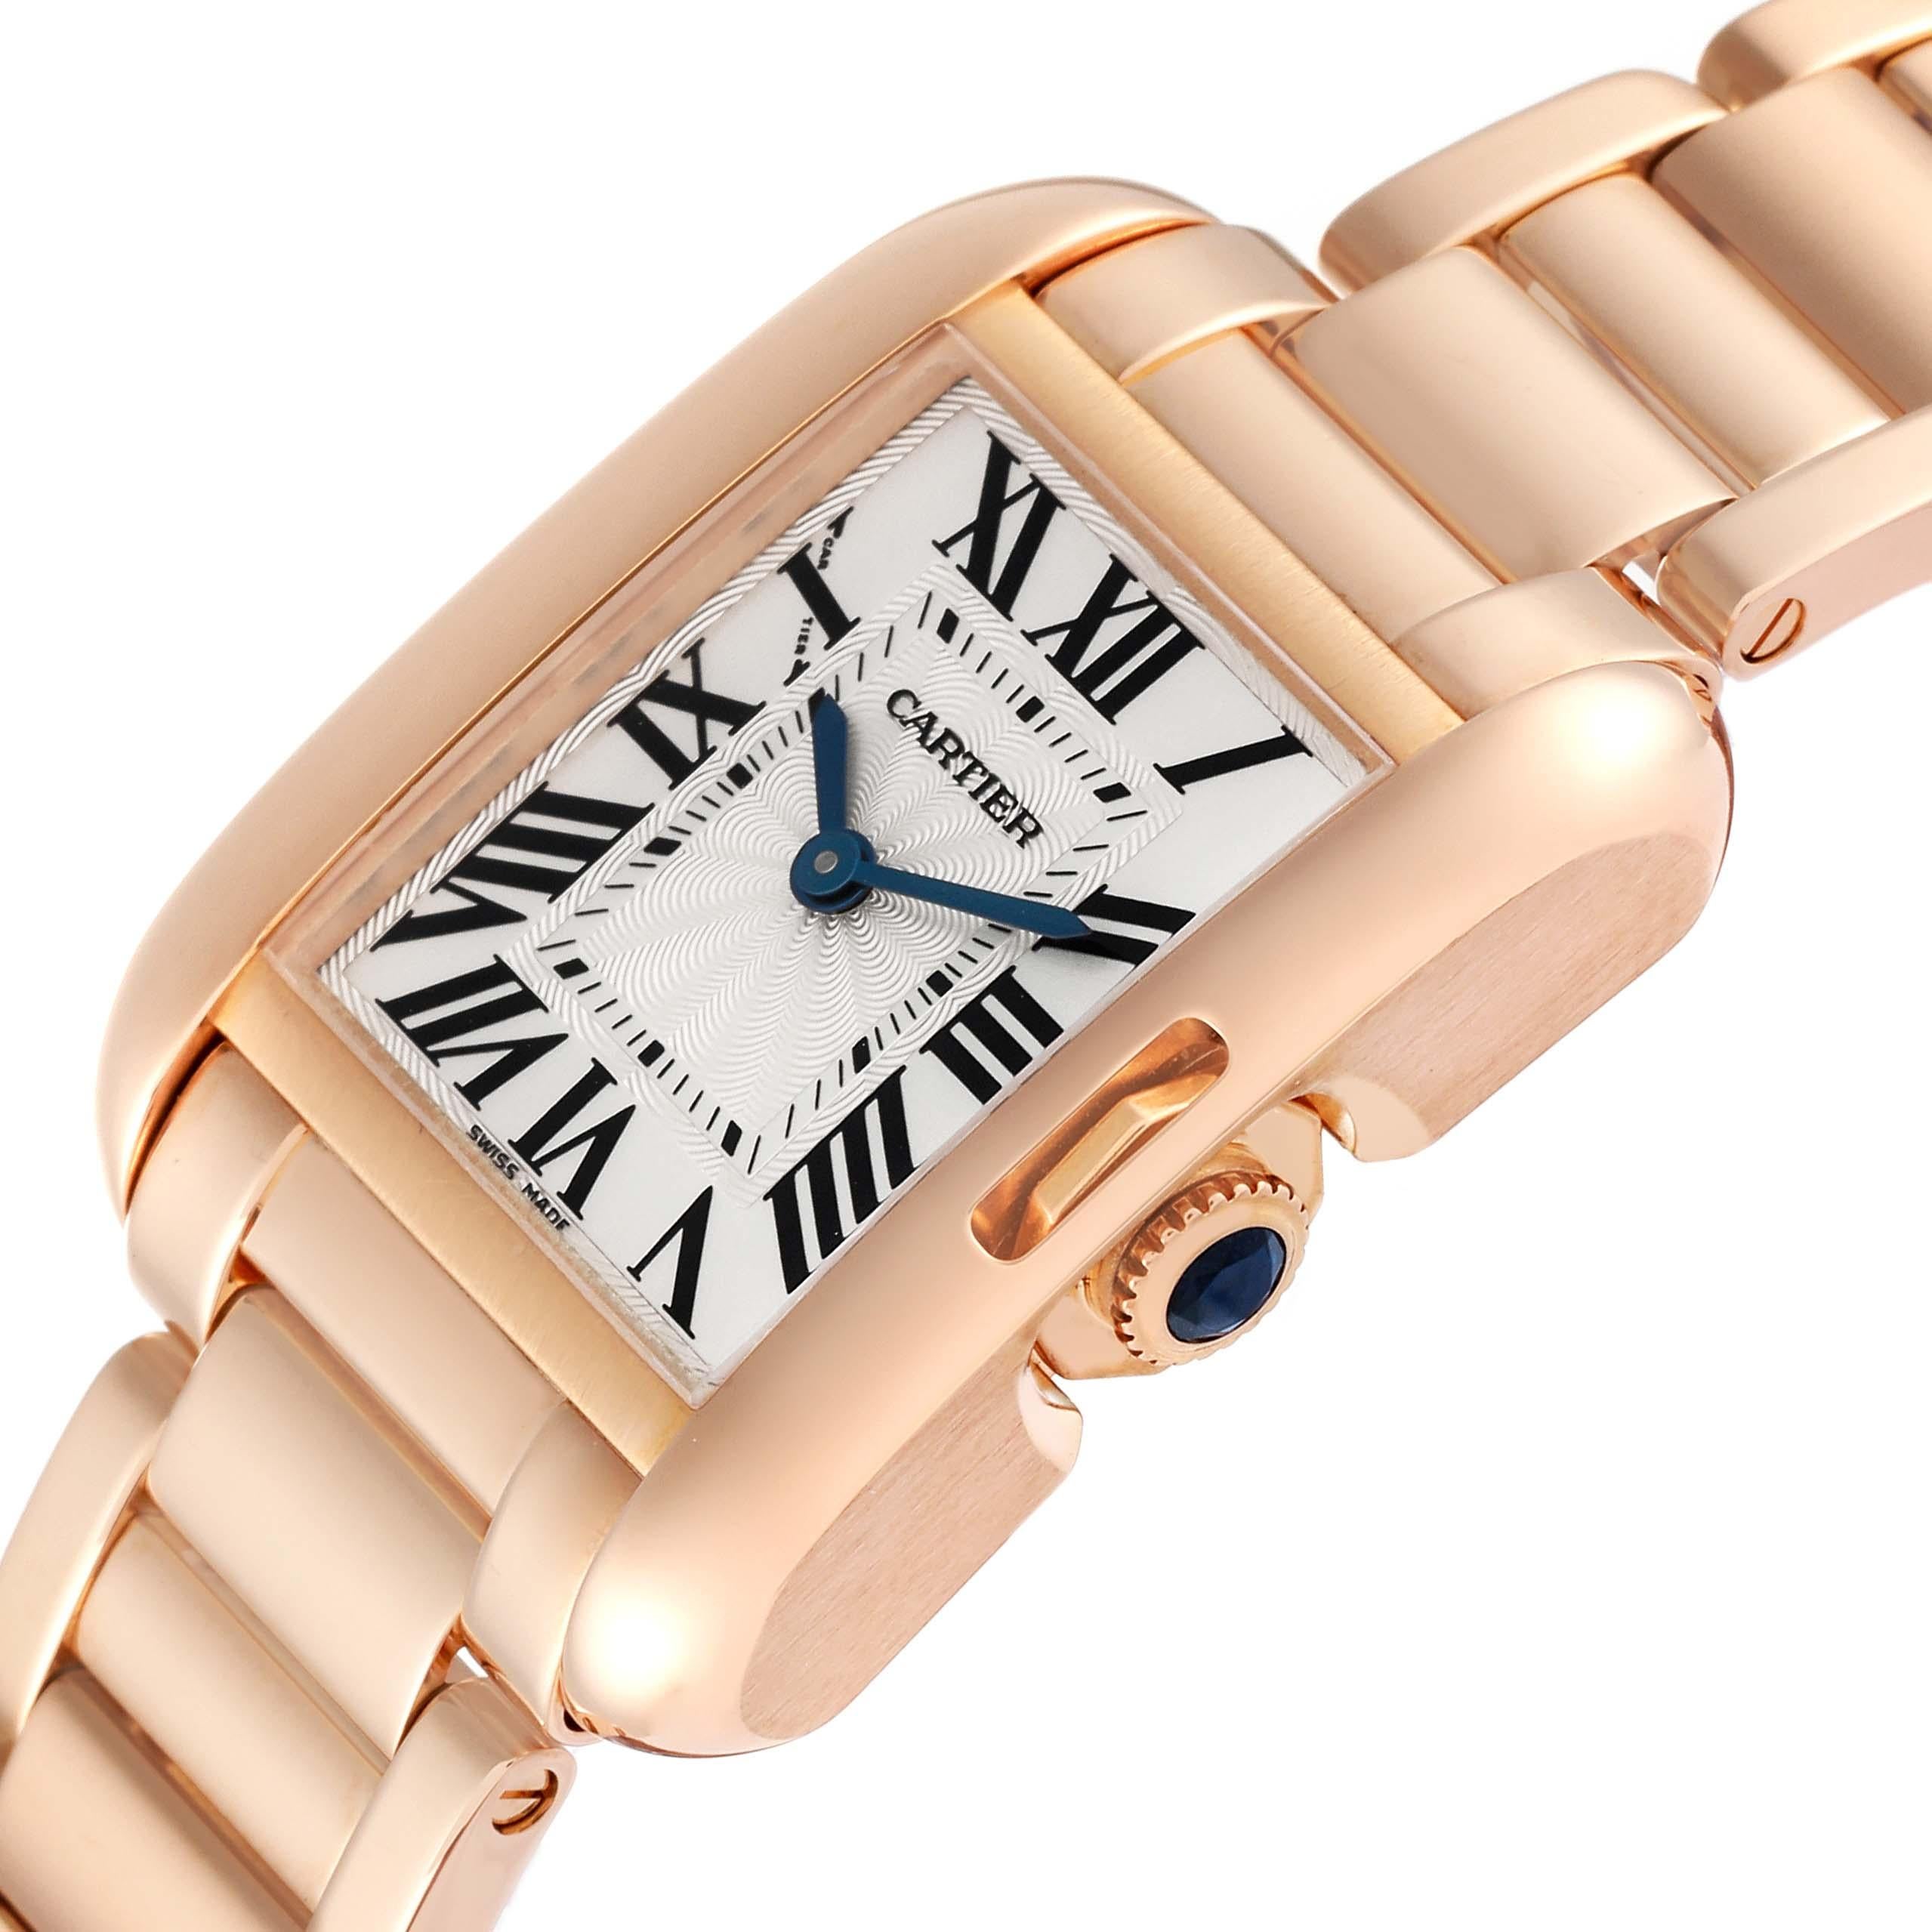 Cartier Tank Anglaise Small Silver Dial Rose Gold Ladies Watch 3580 1